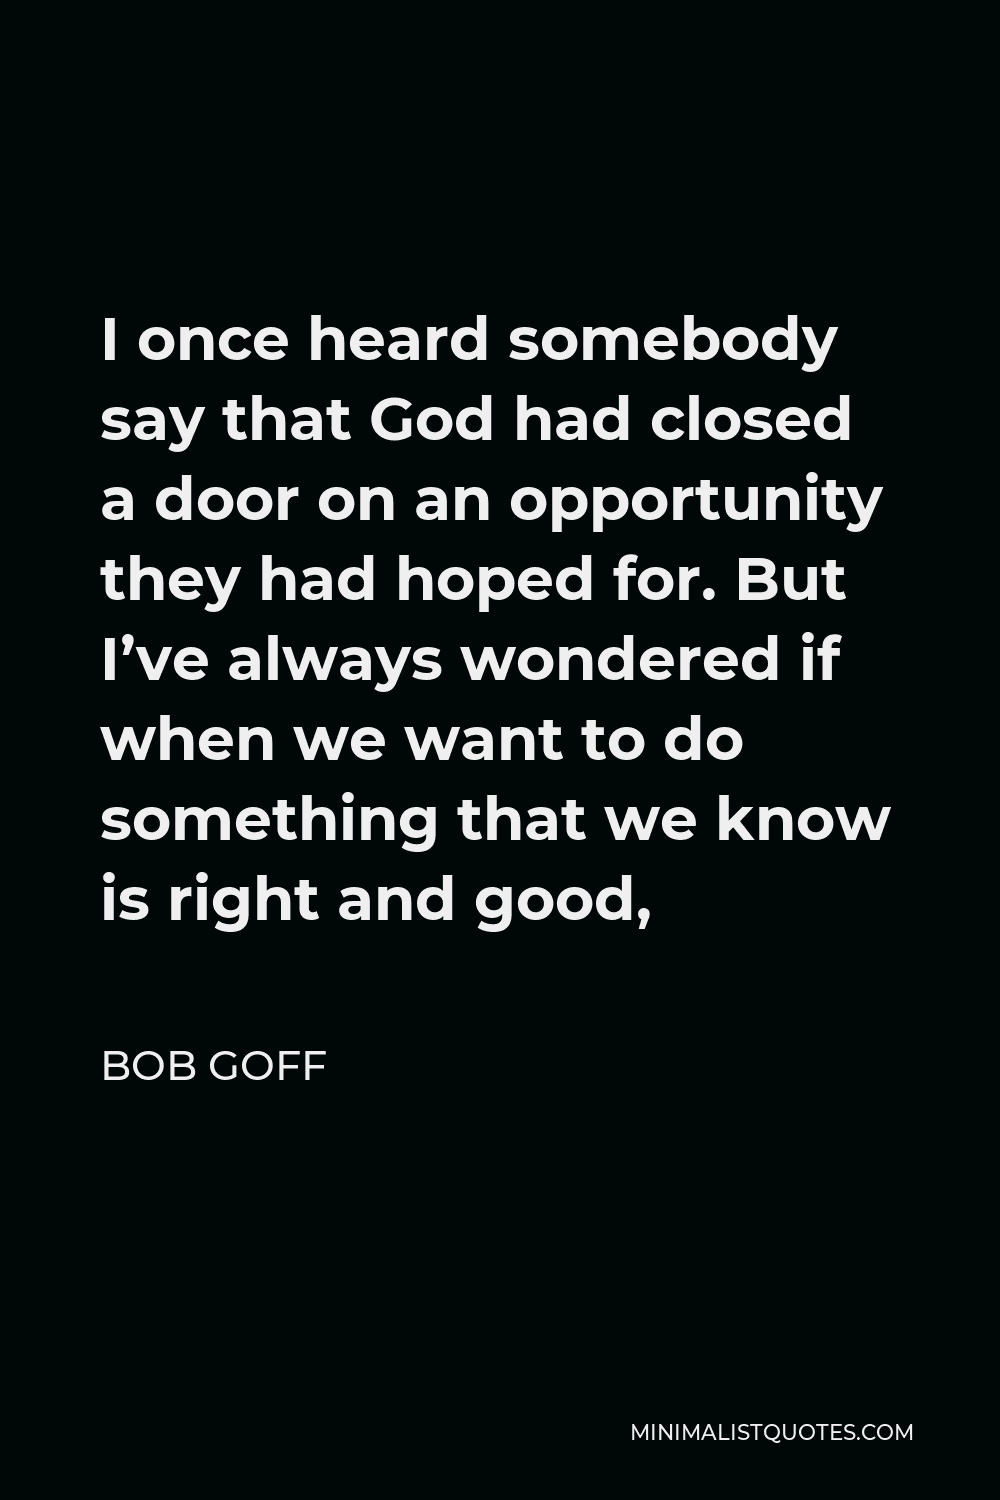 Bob Goff Quote - I once heard somebody say that God had closed a door on an opportunity they had hoped for. But I’ve always wondered if when we want to do something that we know is right and good,